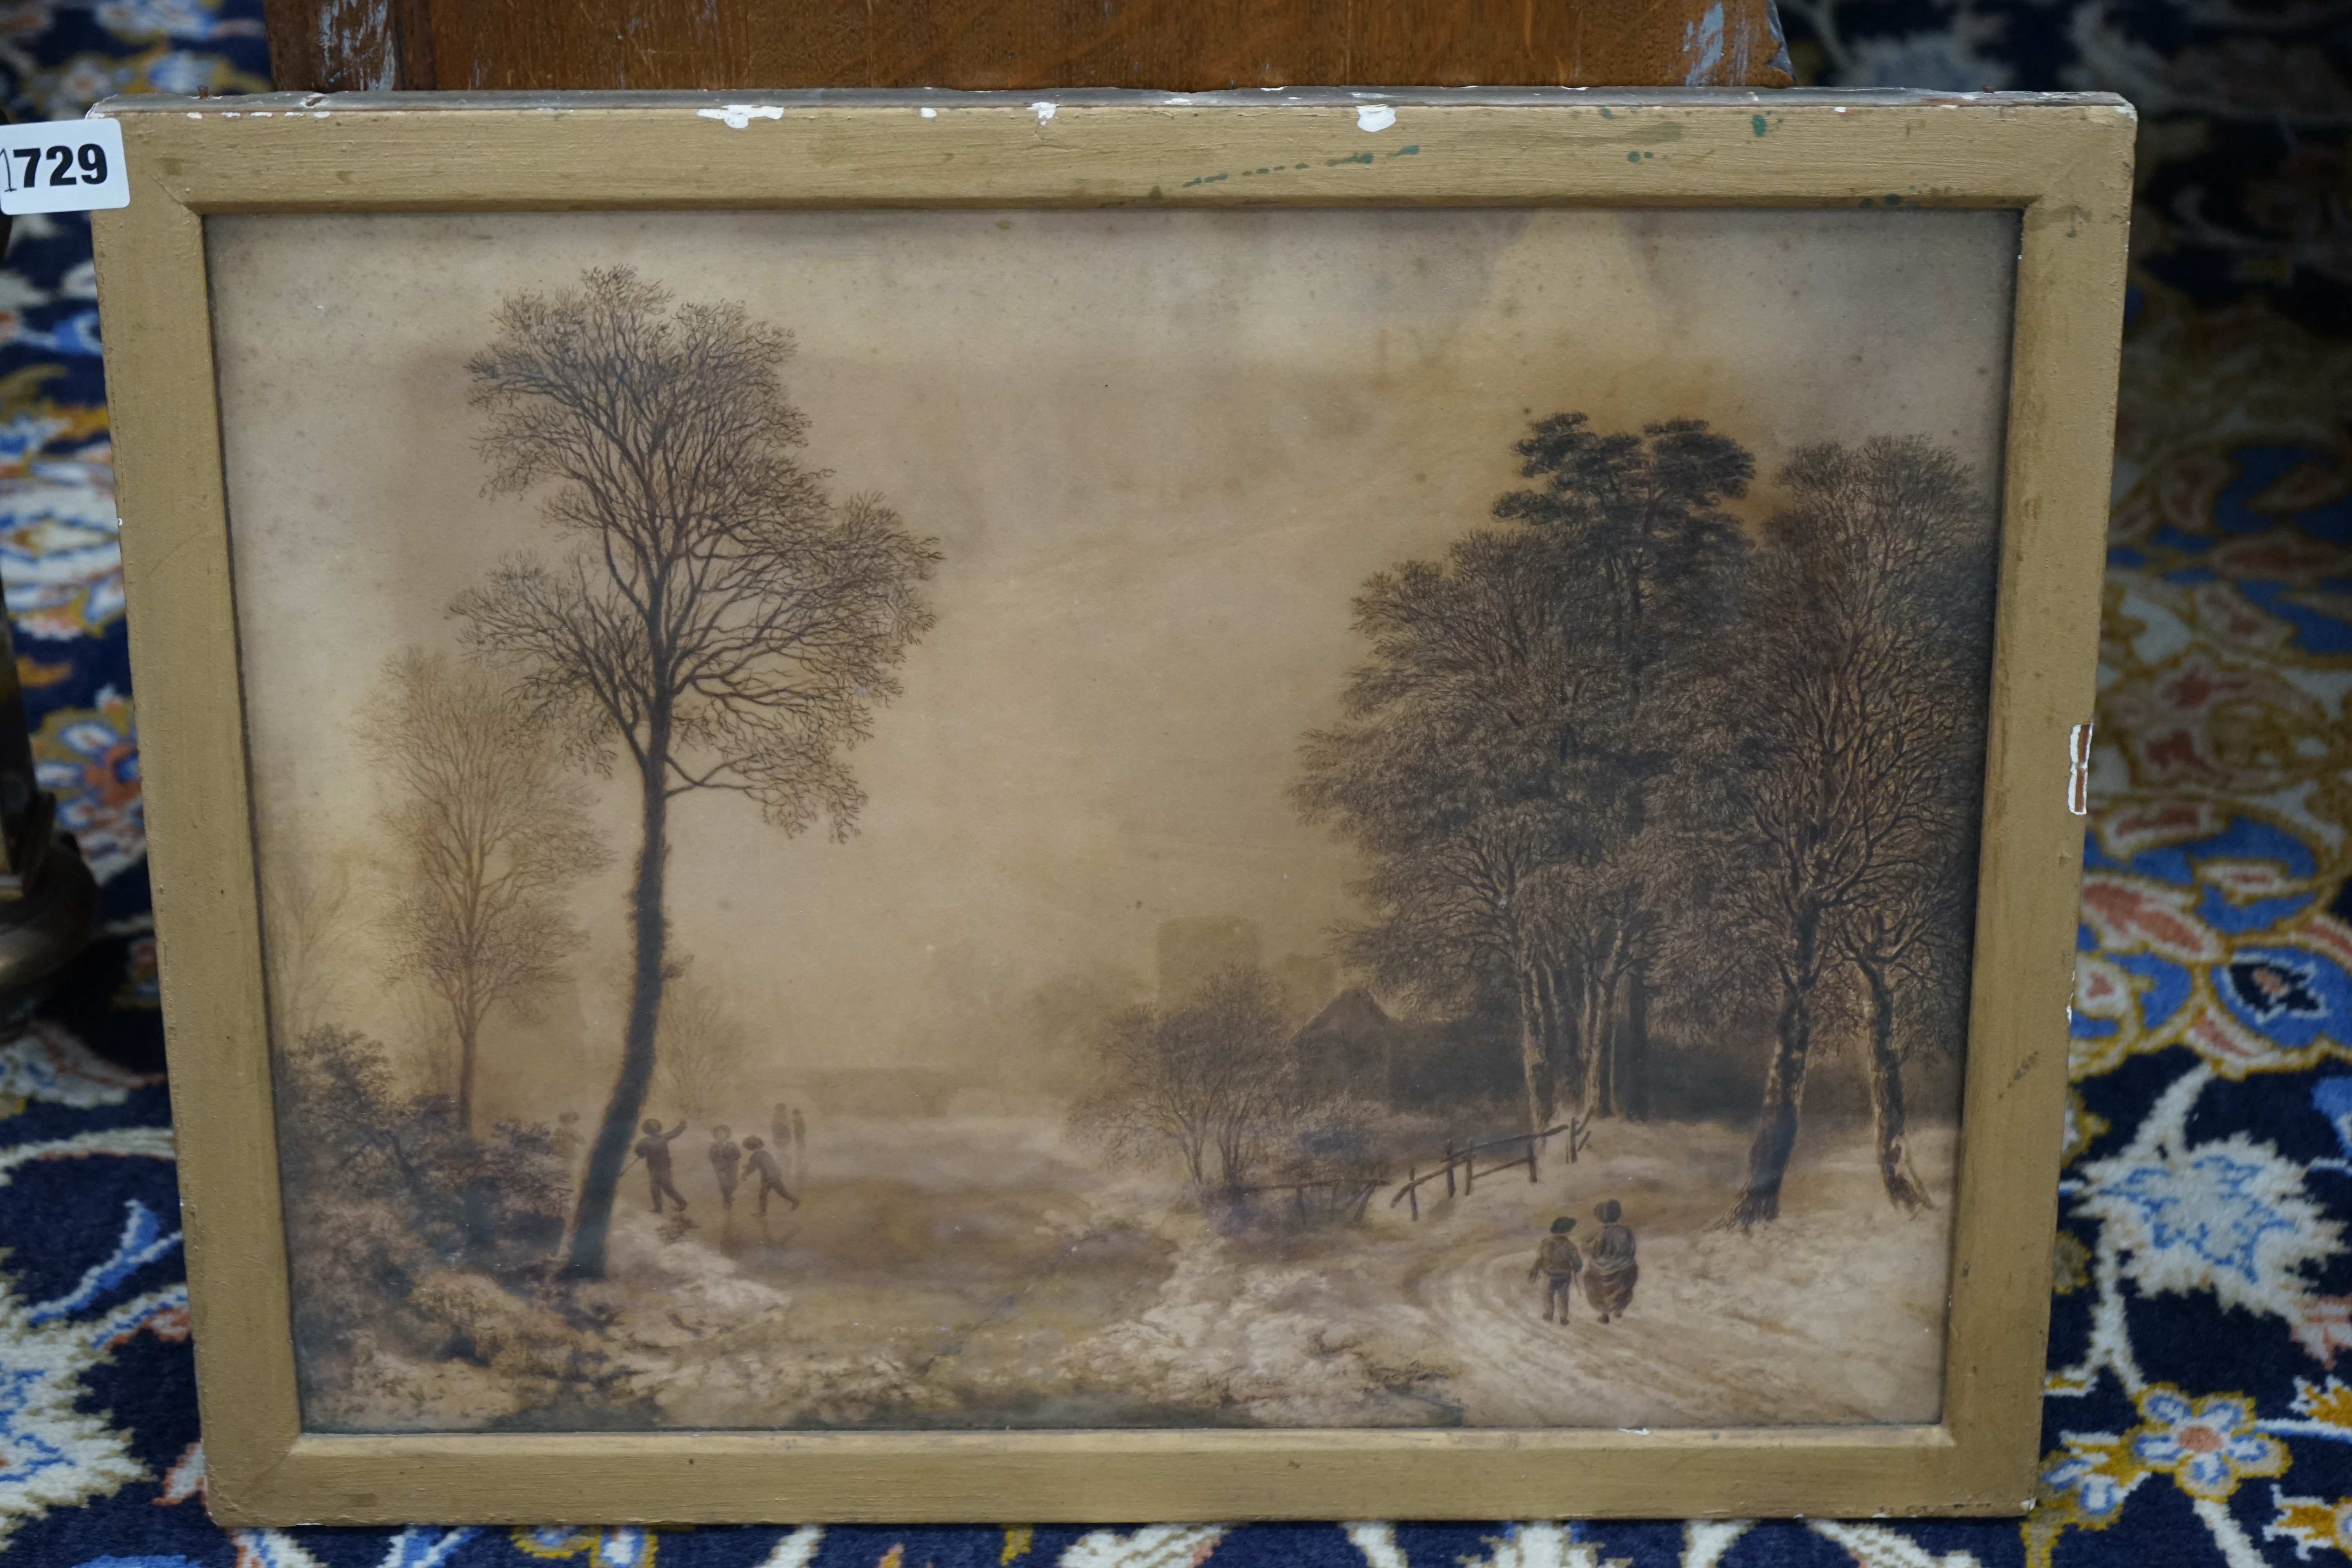 Attributed to Joshua Wallis (1789-1862), ink and wash, Winter scene with figures skating, inscribed Victoria and Albert Museum 464 FA verso, 33 x 44cm. Condition - poor to fair, discolouration